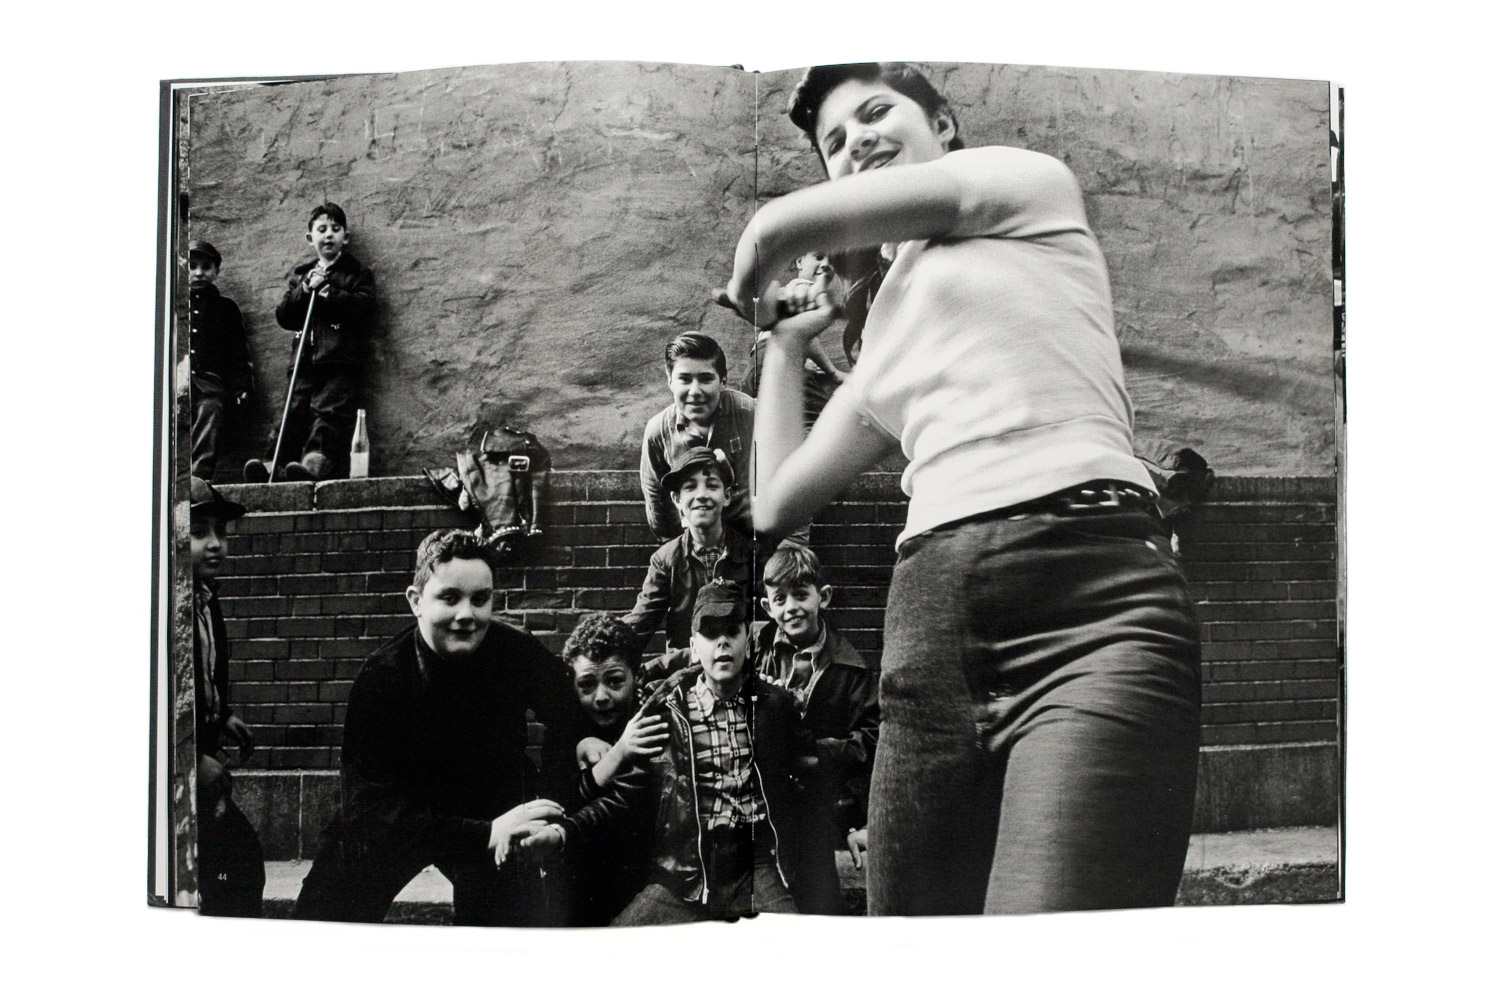 William Klein selected alternate frames for some of the images for the republished edition.